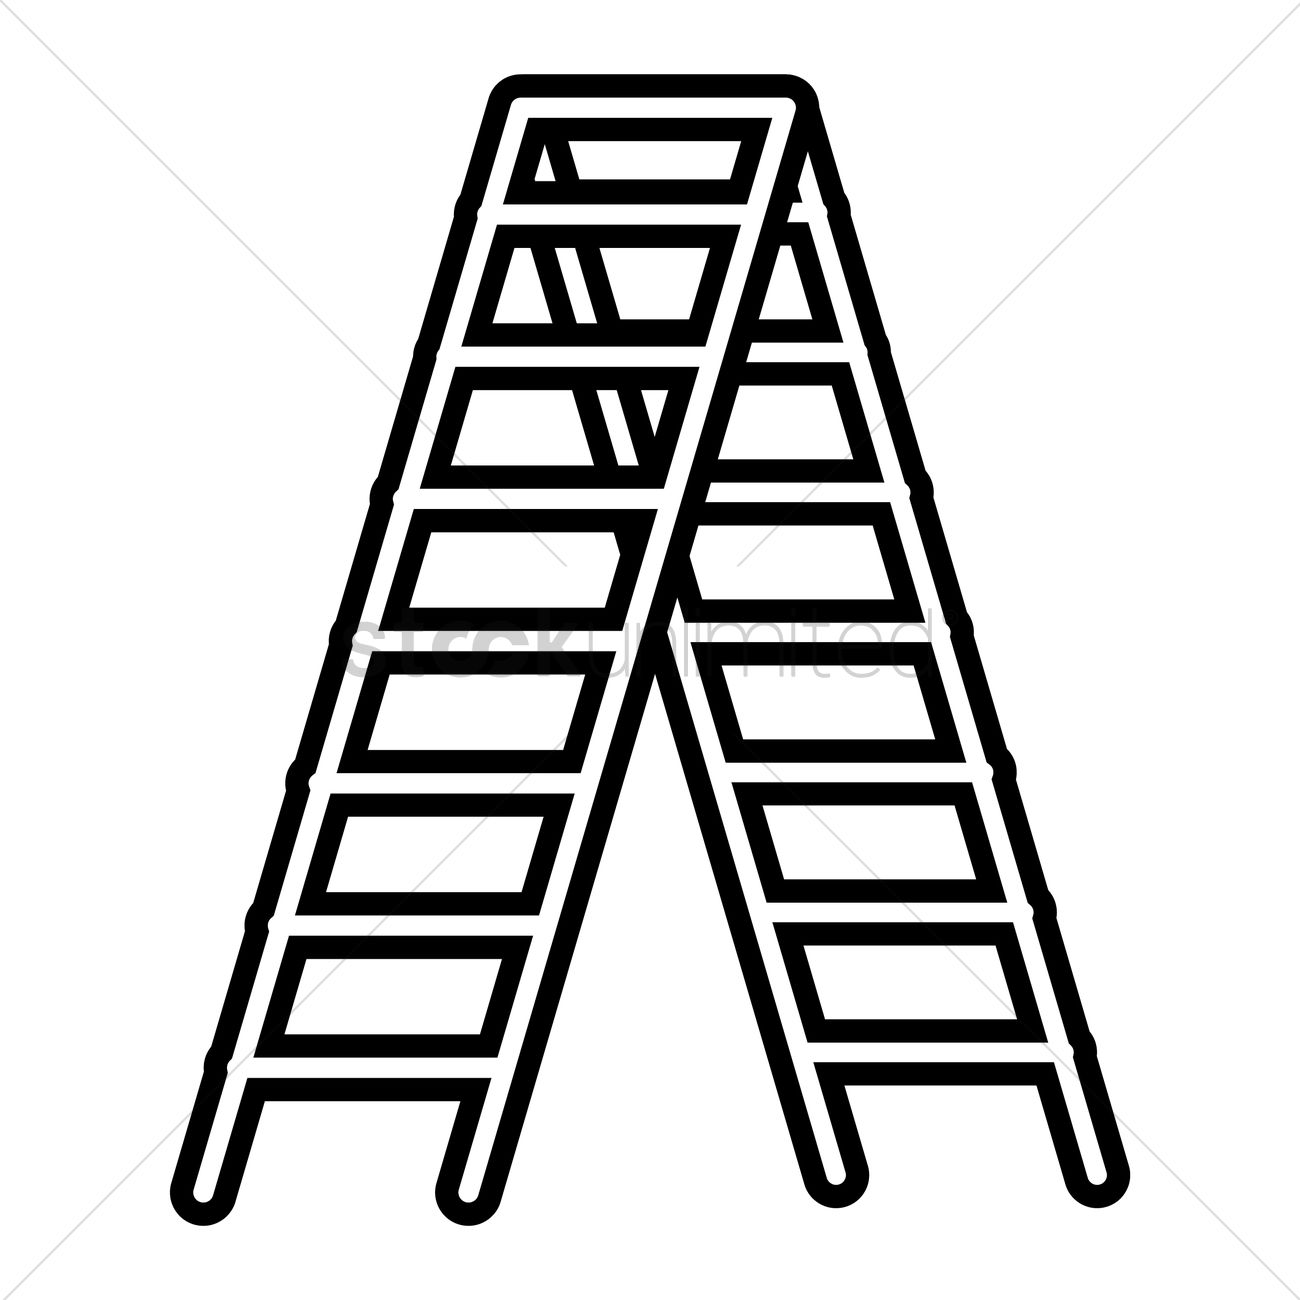 Picture #187201 - Ladder clipart black and white intended for your inspirat...